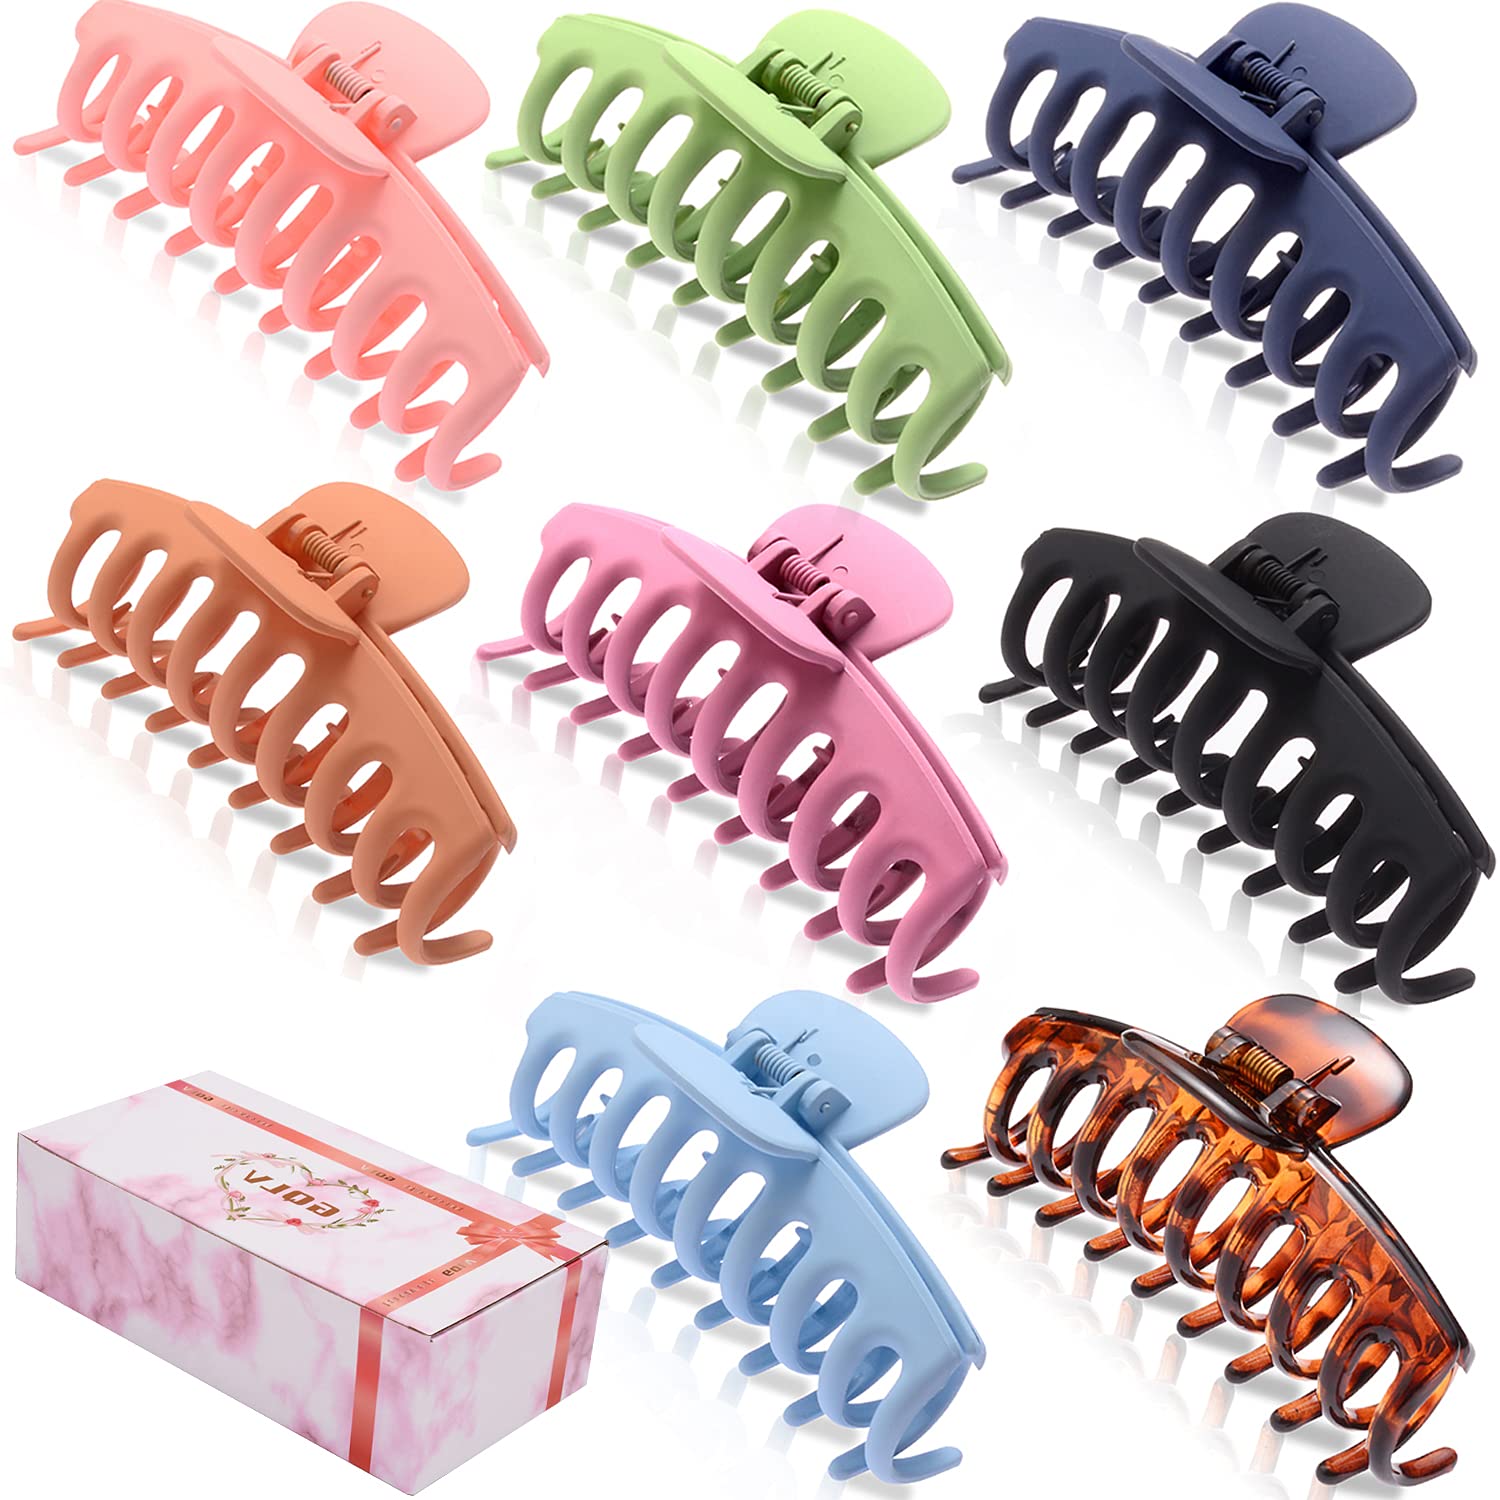 GQLV 8 PCS Large Hair Claw Clips for Women, Inch Big Banana Hair Clips  for Thick Hair/Thin Hair,Nonslip Jaw Hair Clips,Butterfly Hair Clips ,Hair  Barrettes ,Fashion Accessories for Girls A-8pcs colorful